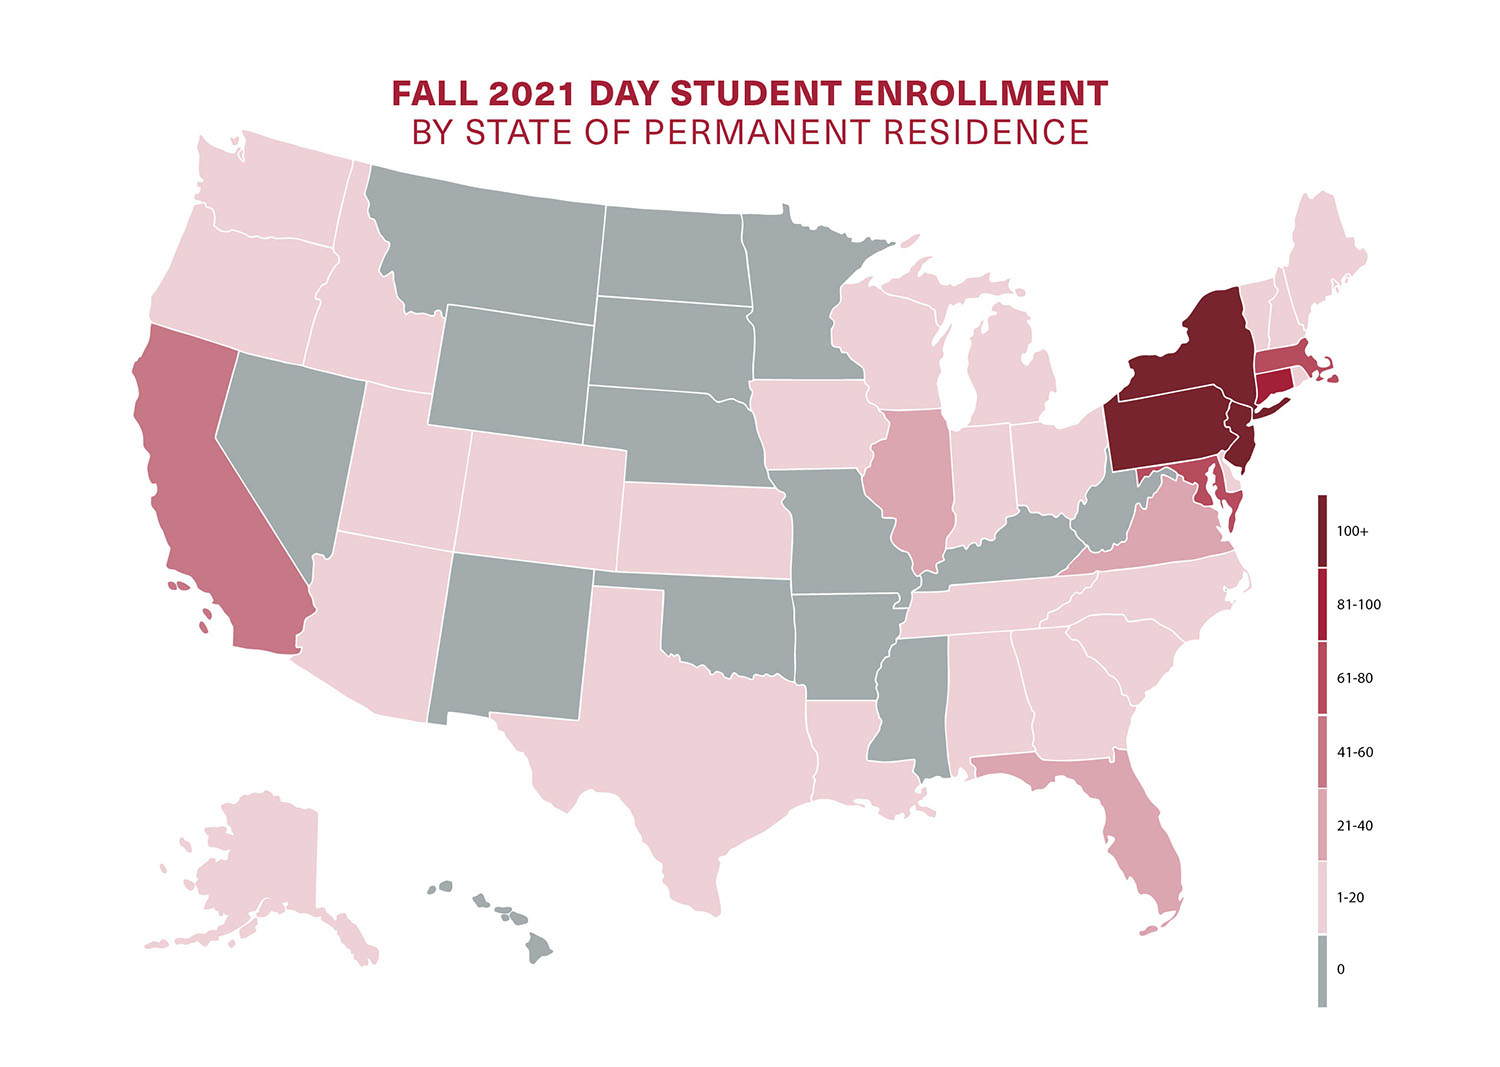 Fall 2021 day student enrollment by state of permanent residence.